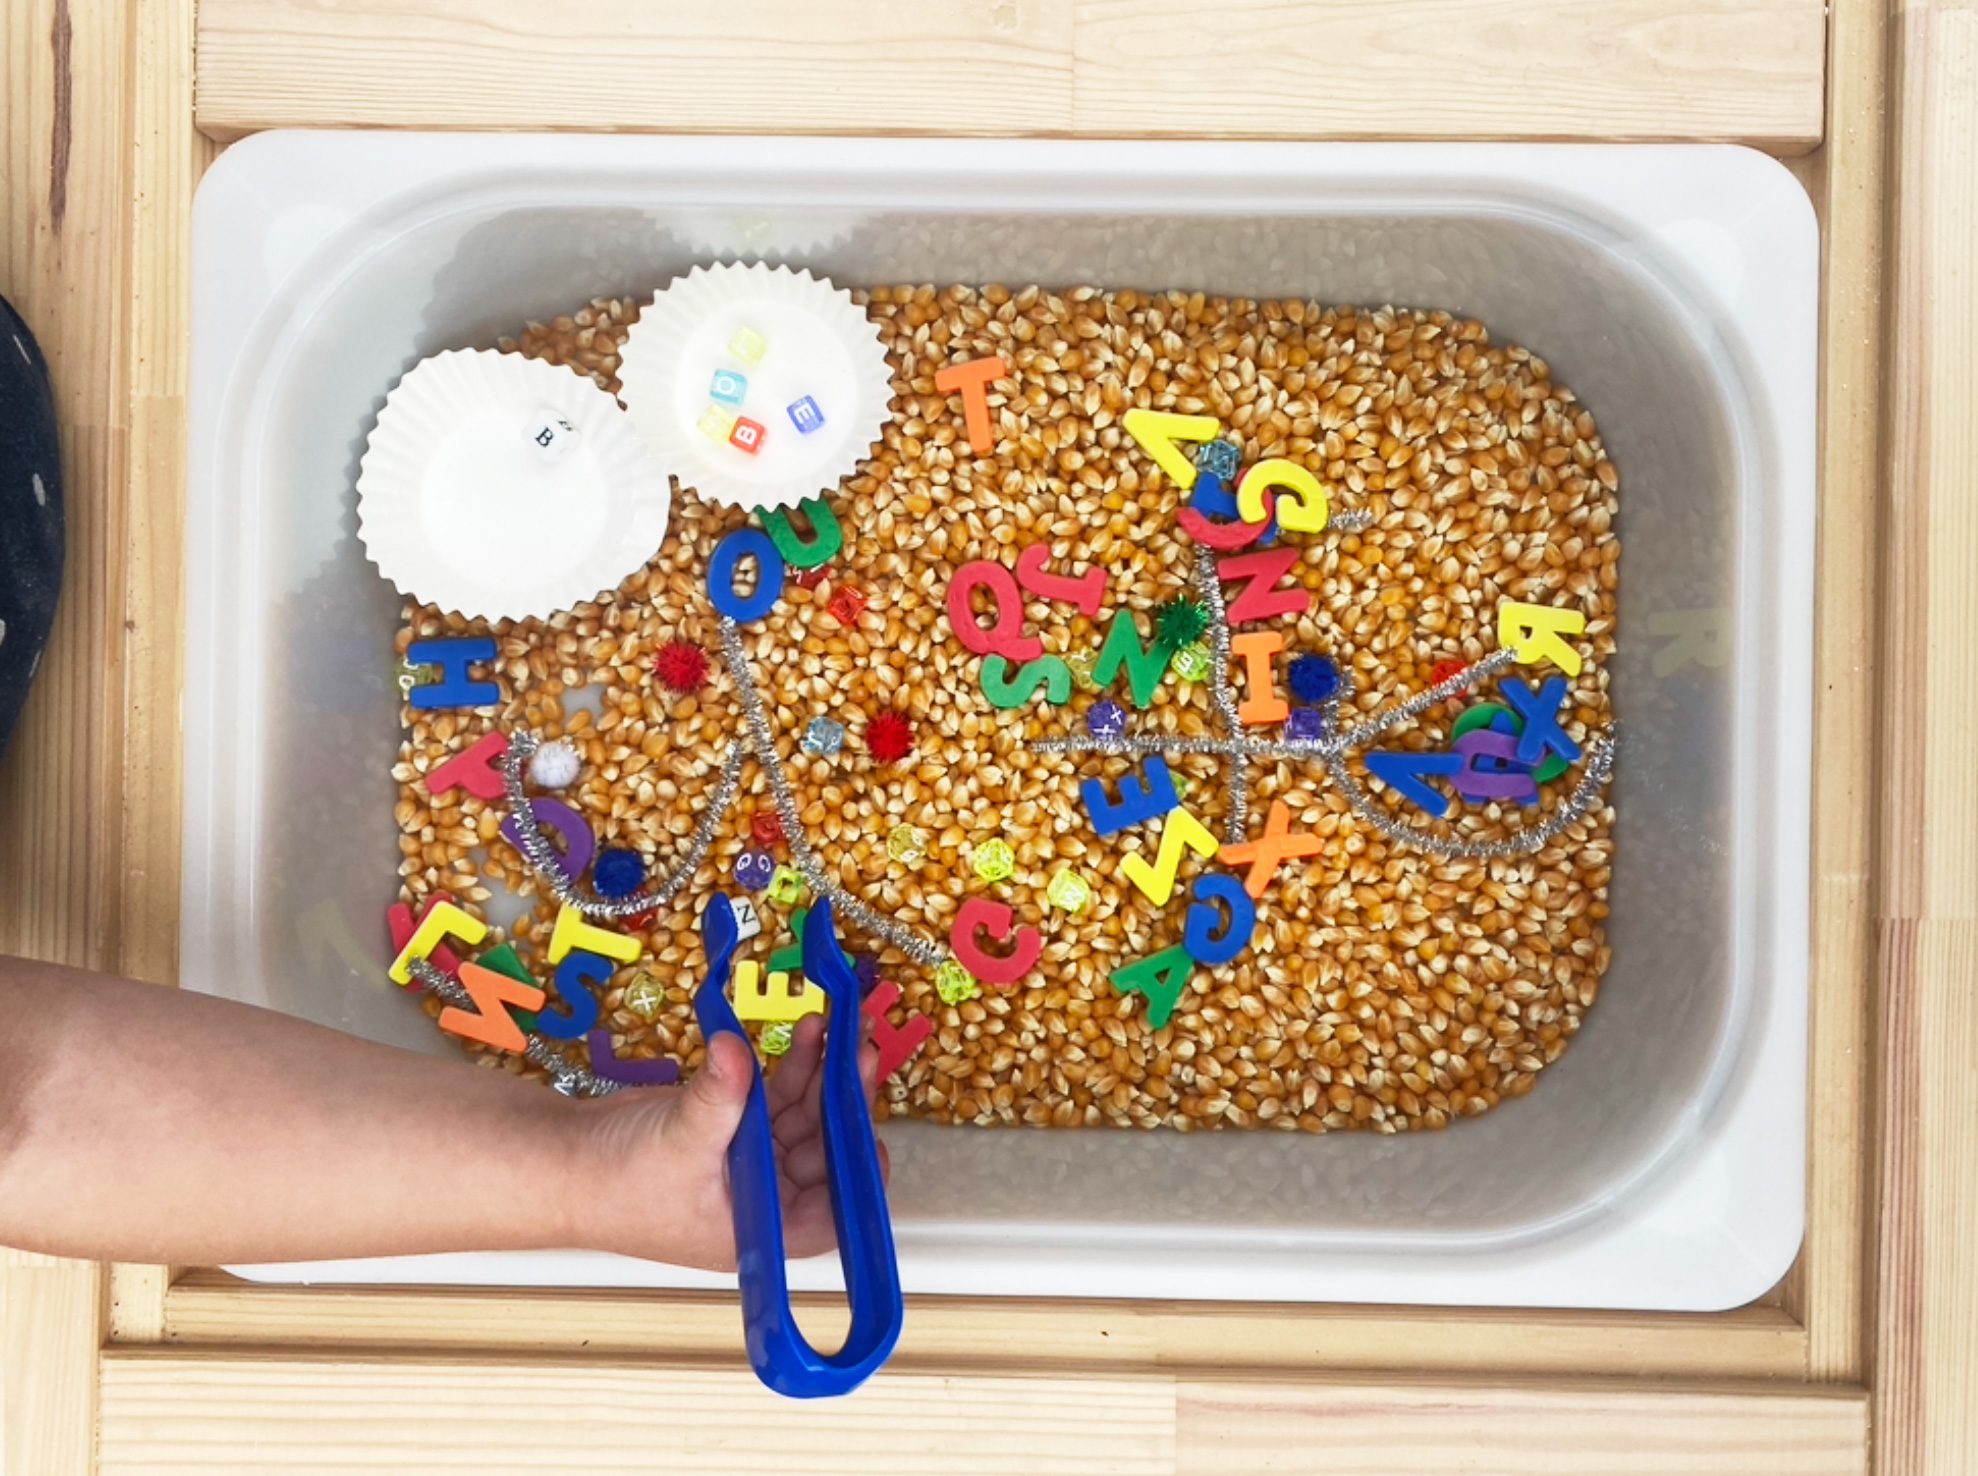 Kids can work on fine motor skills with sensory play too!